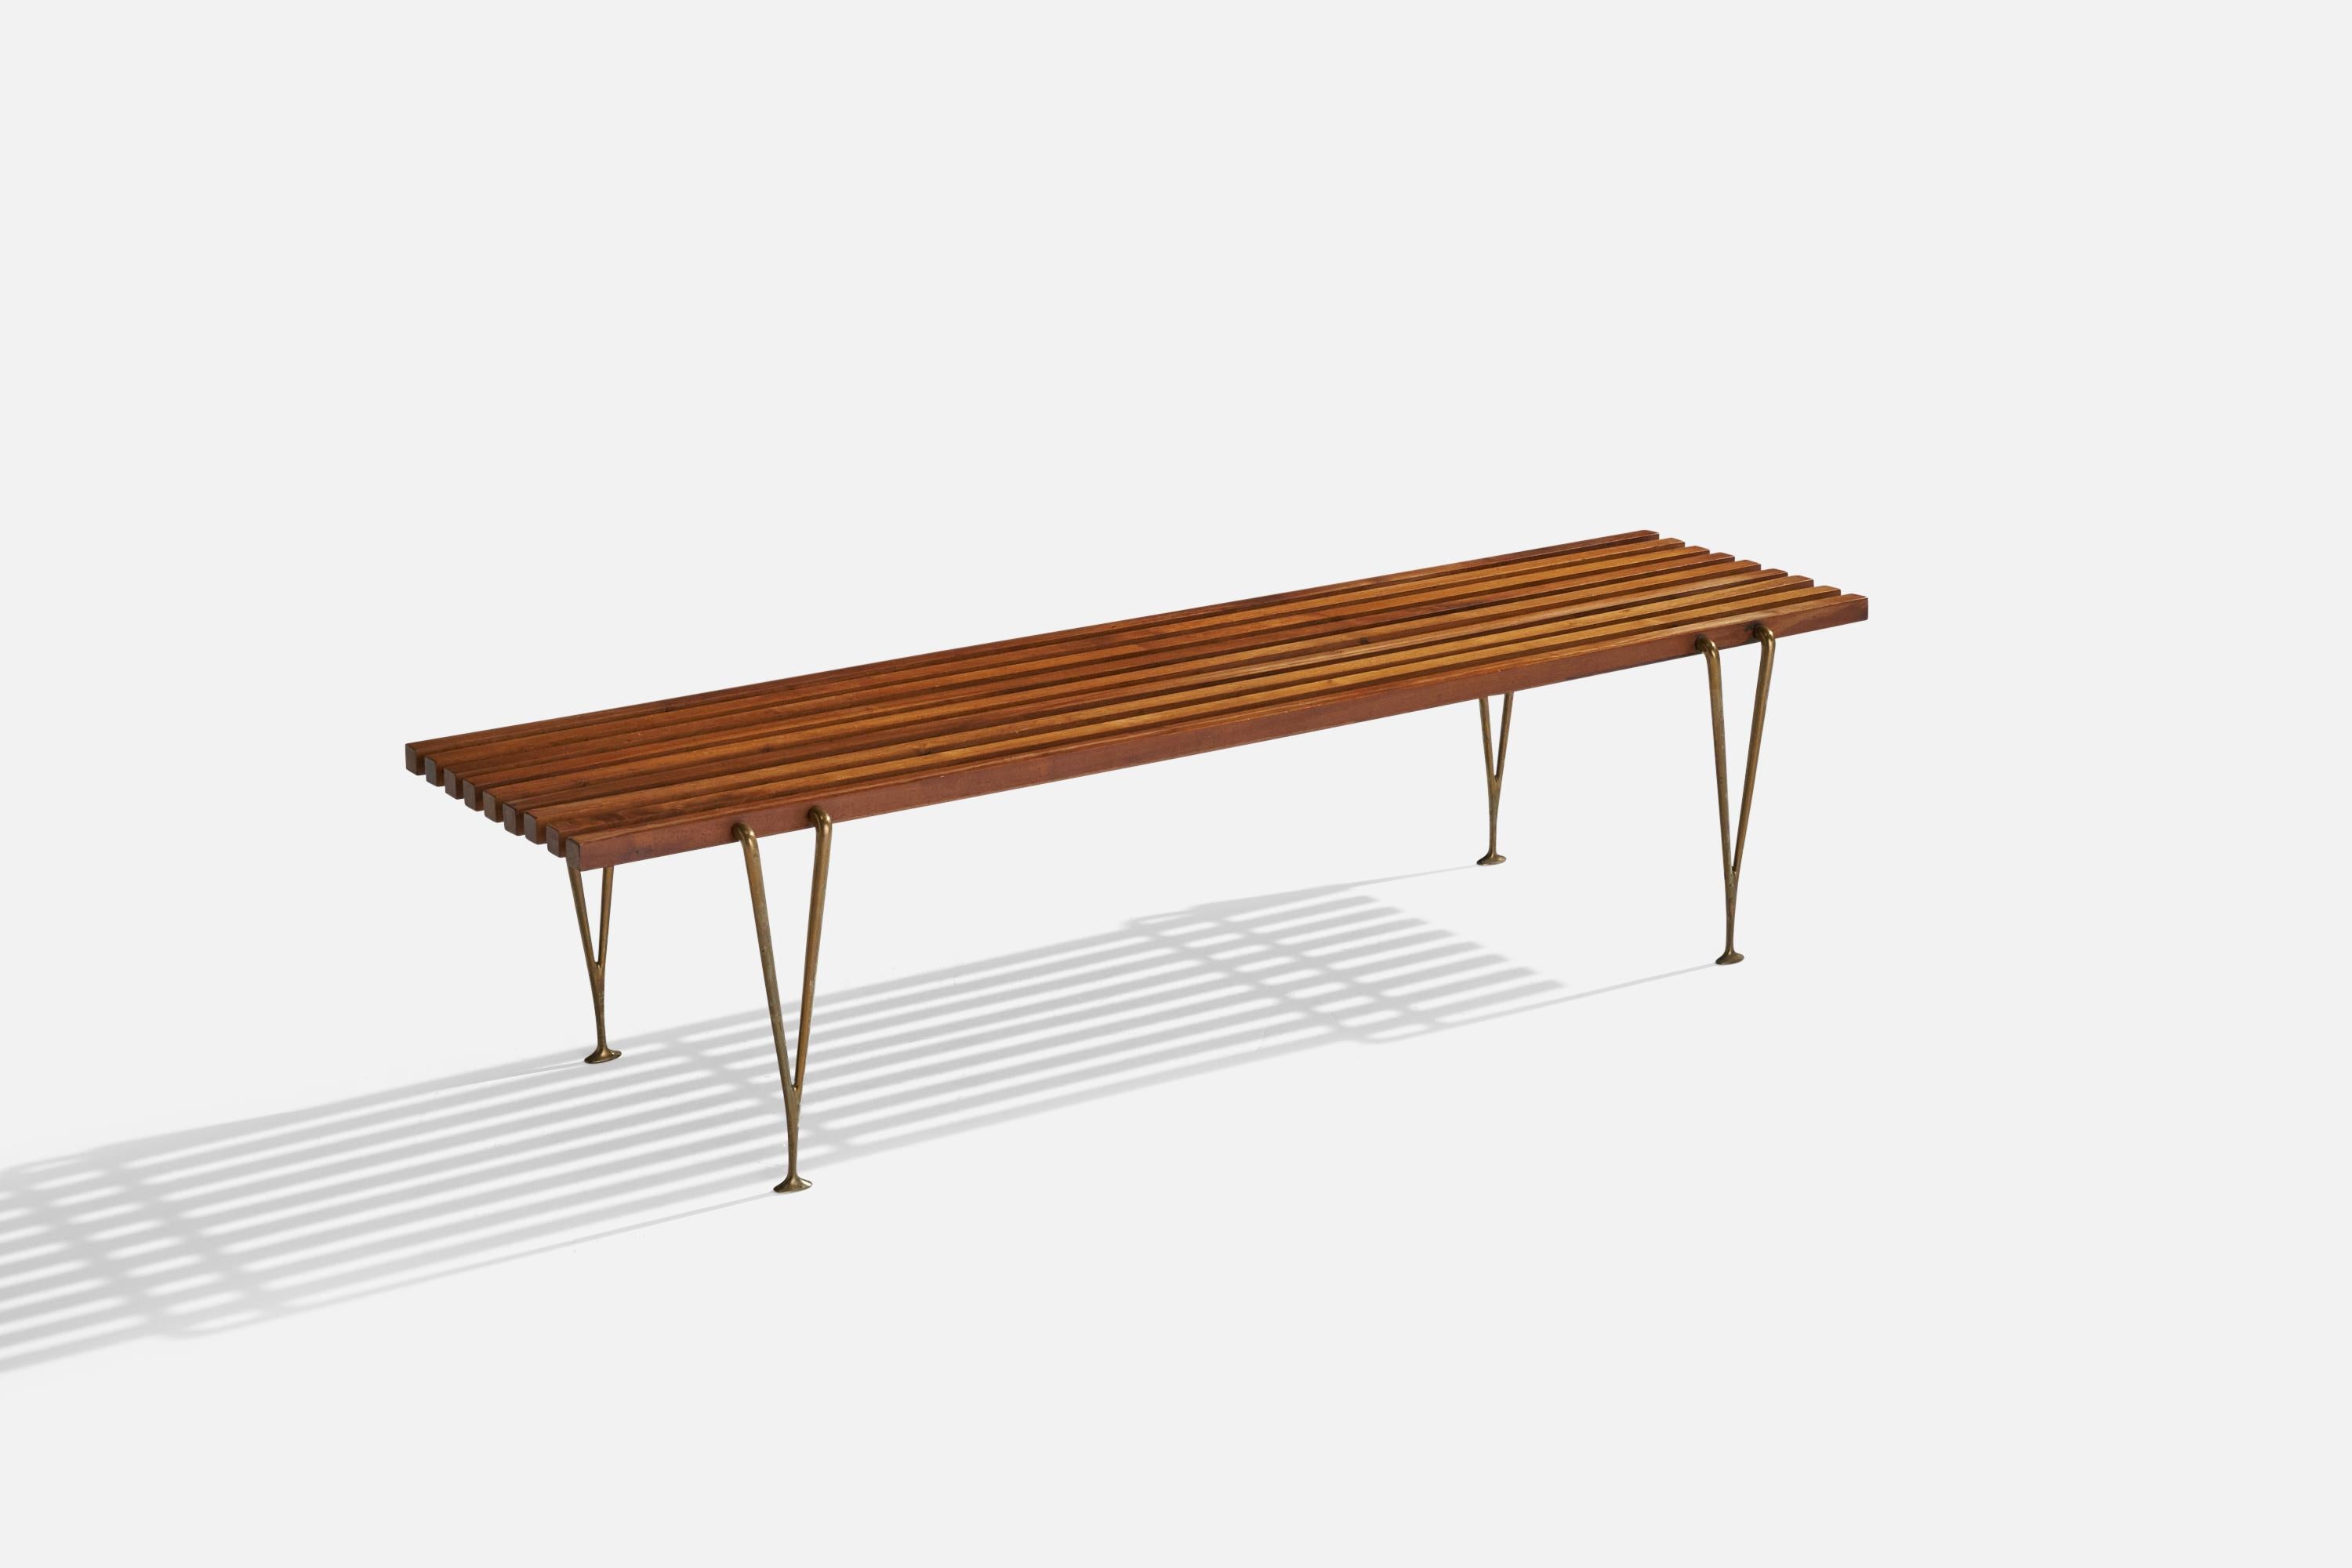 A walnut and brass bench designed by Hugh Acton and produced by Hugh Acton, Inc. Kalamazoo, Michigan, c. 1954.
 